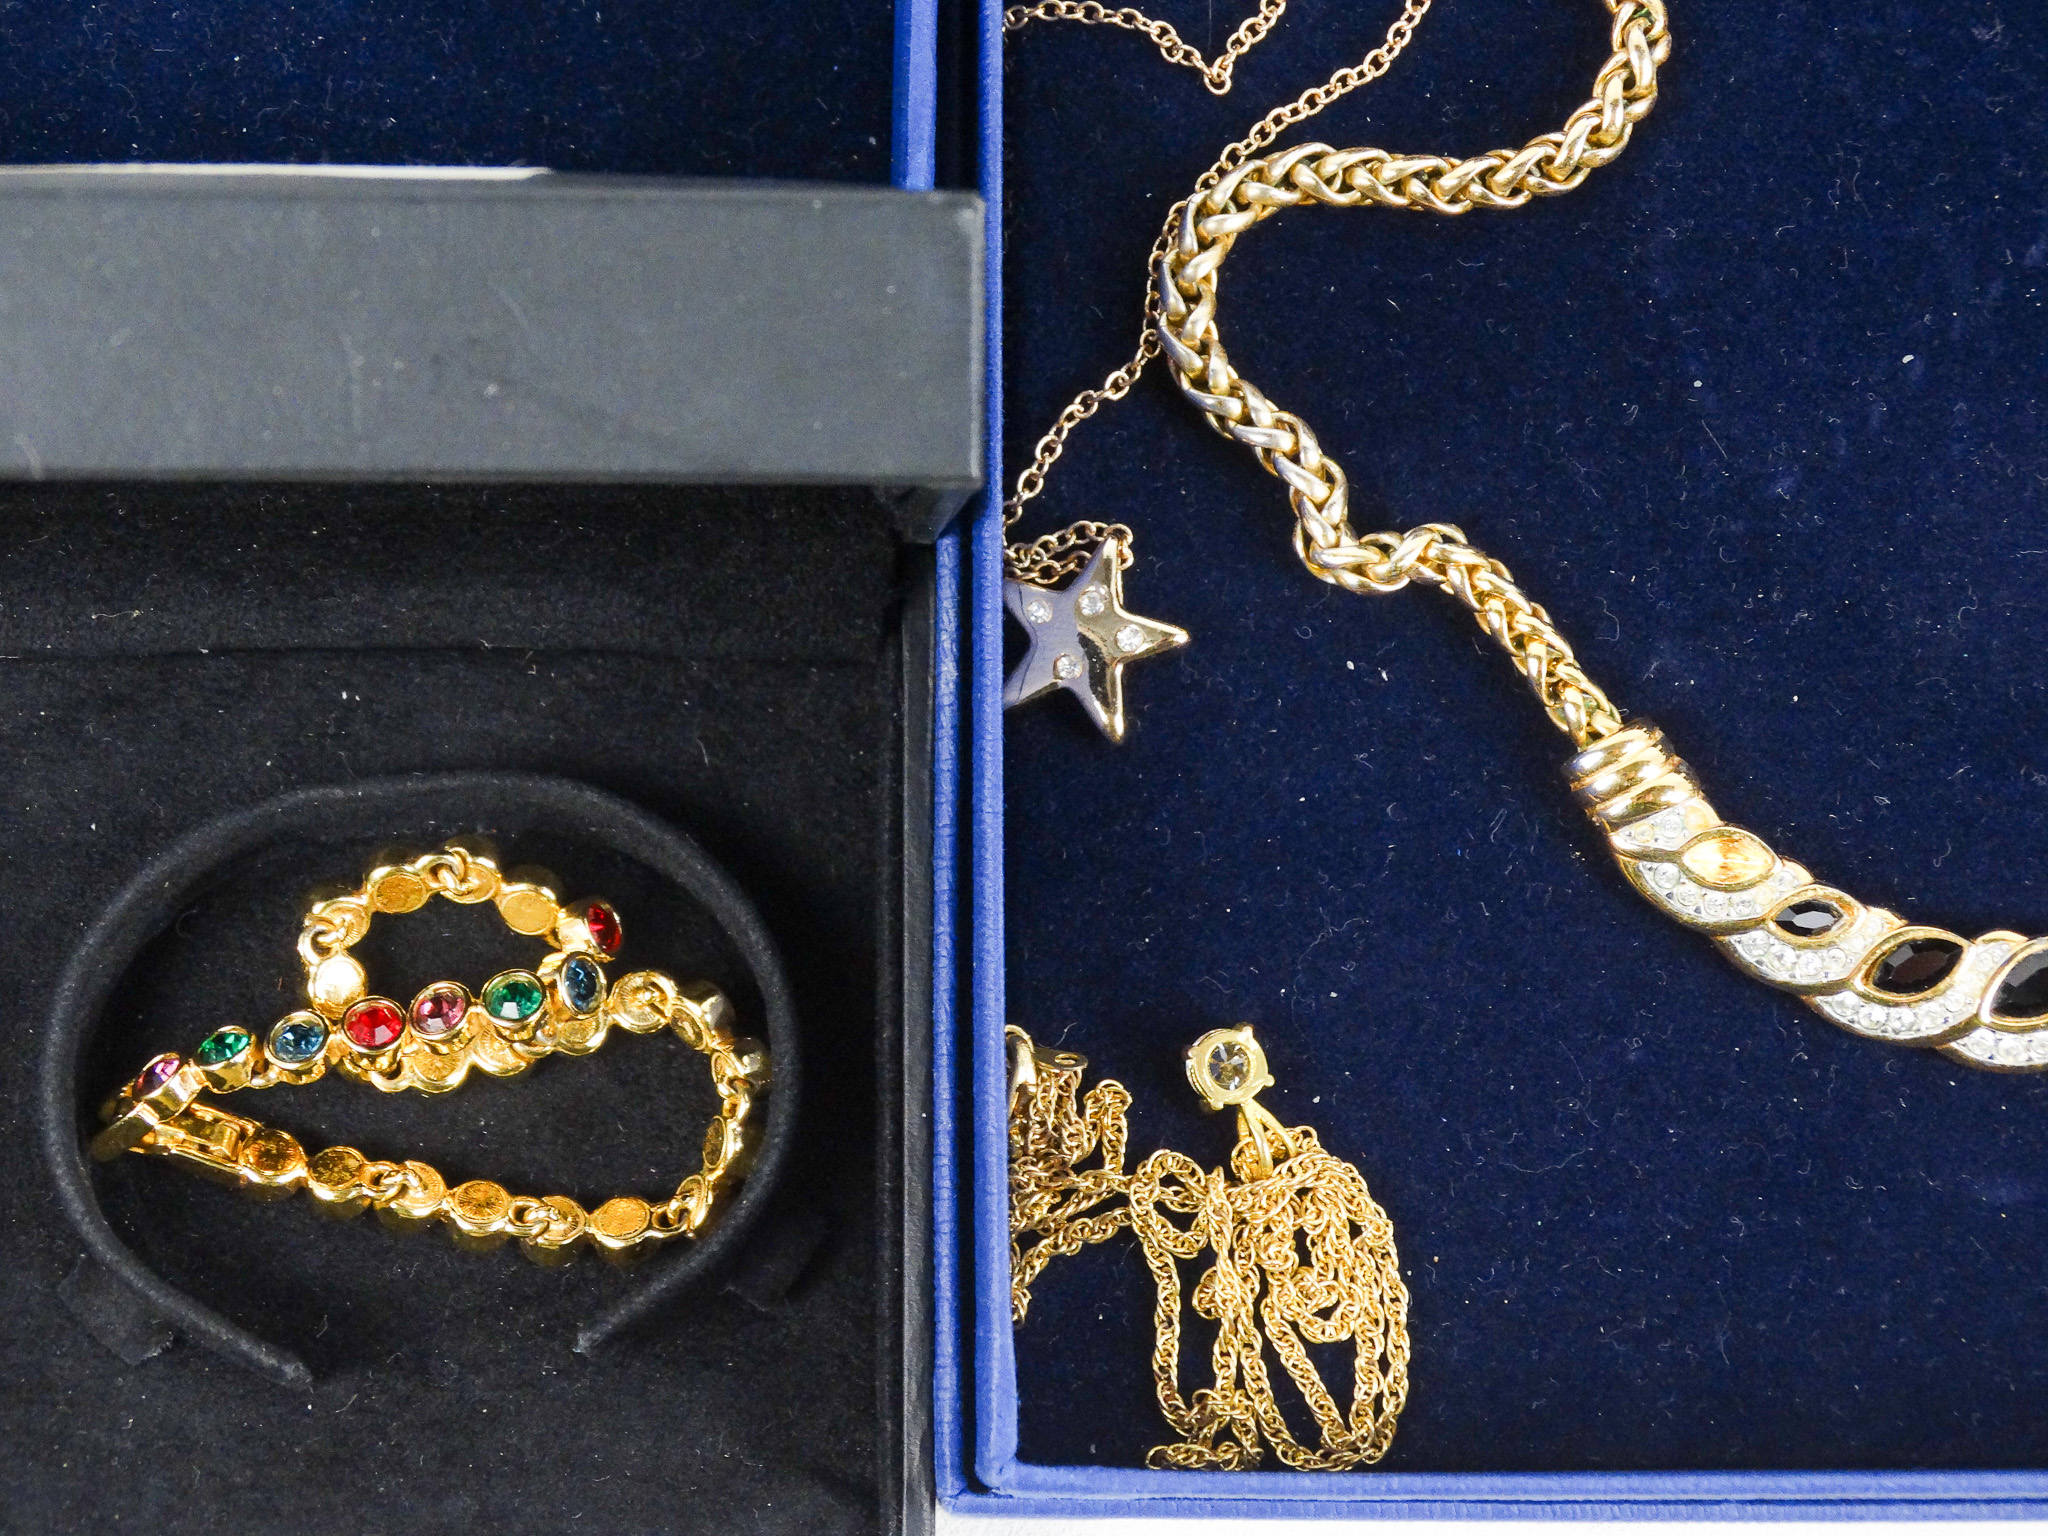 A quantity of Swarovski costume jewellery - many items with original retail boxes - Image 8 of 9